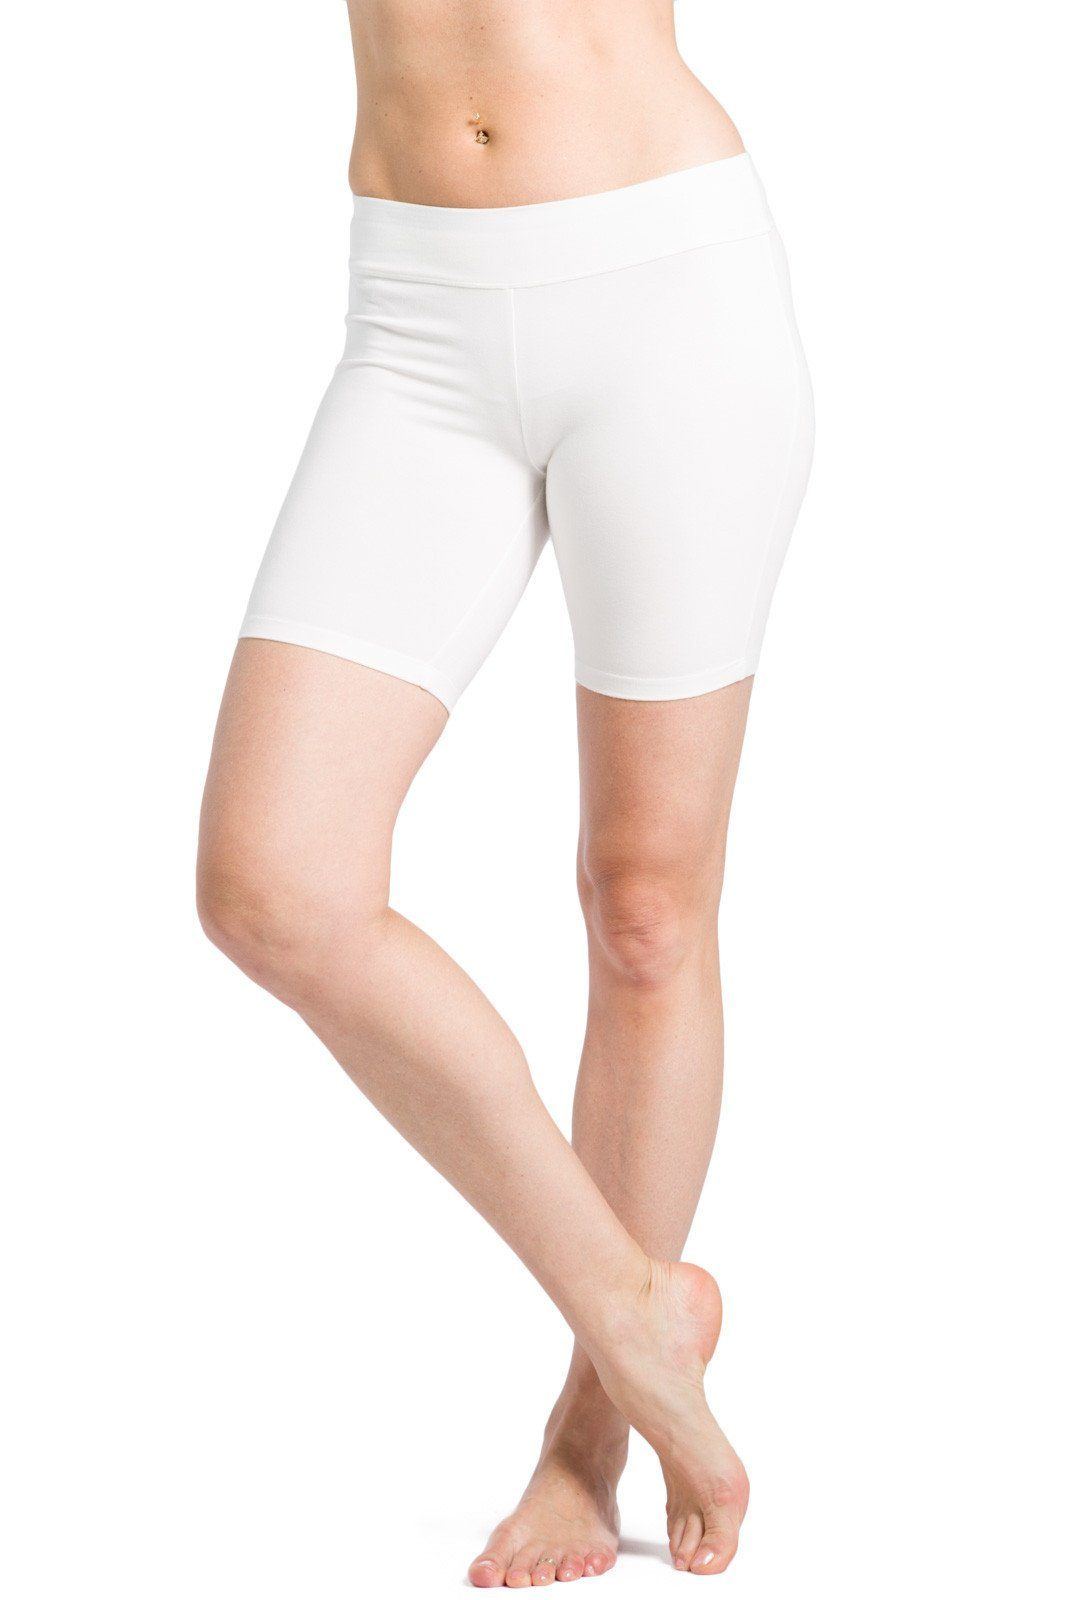 Ultra Low Rise White Mid Thigh Yoga Shorts yoga Shorts for Women